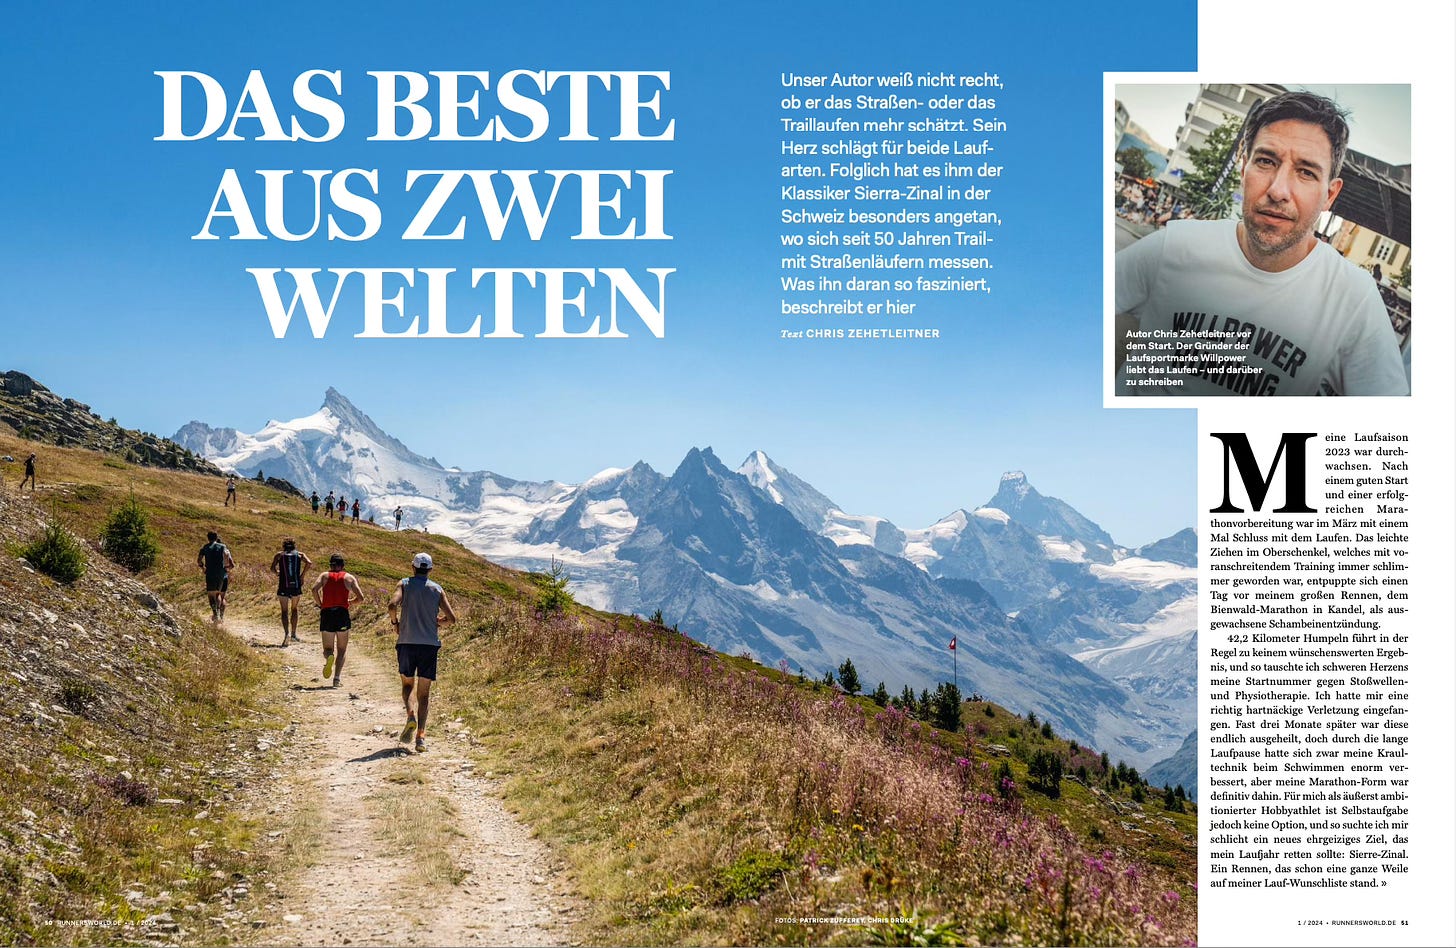 Double page of Runner's world magazine, showing a mountain range in the canton Valais with runners participating the Sierre-Zinal race